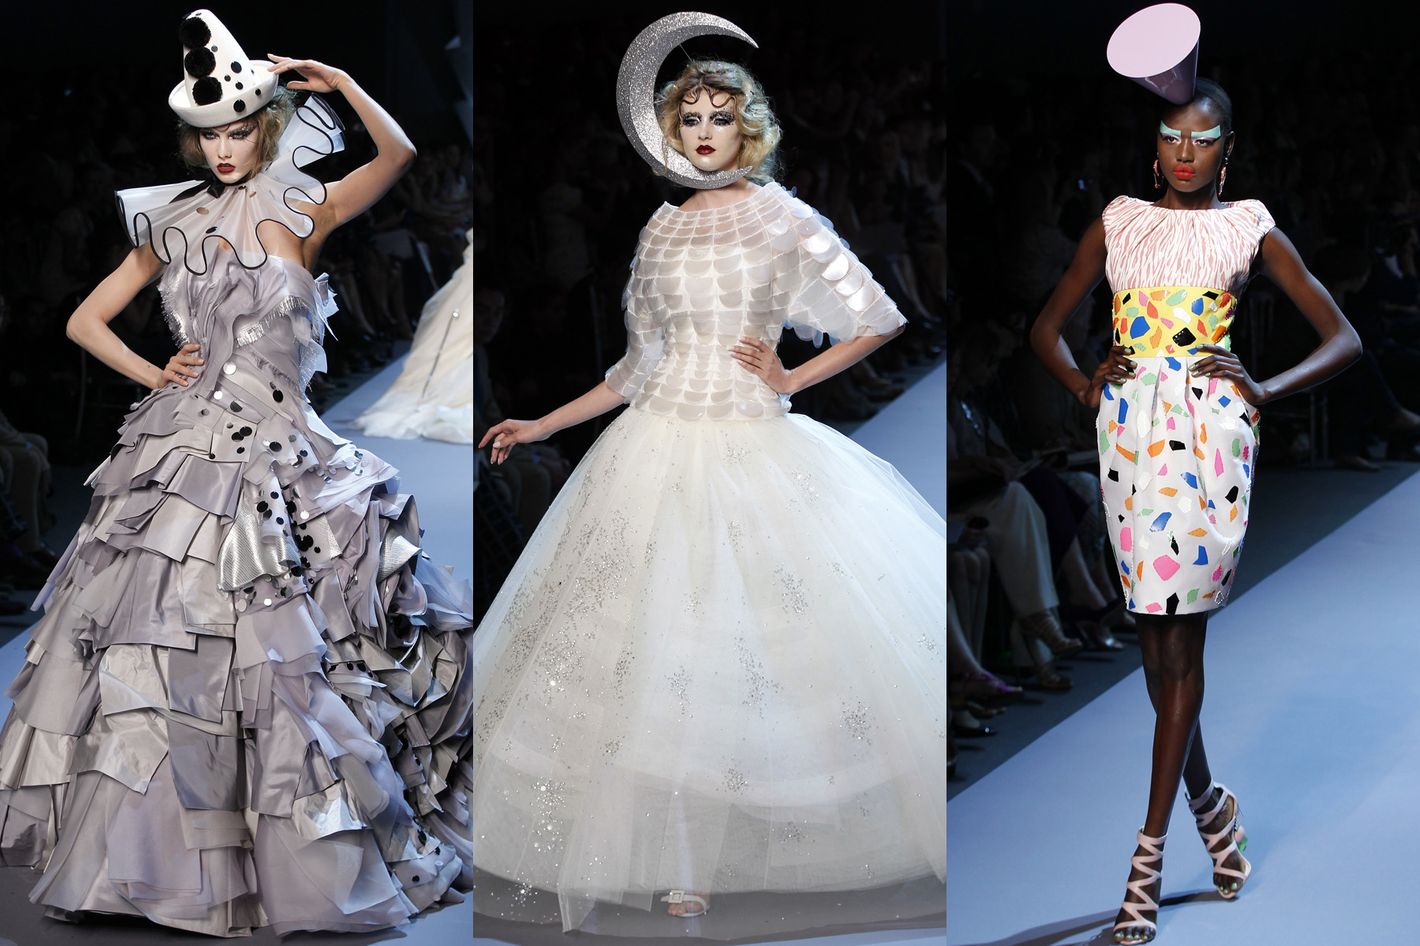 The Story Behind the Soundtracks of John Galliano's 00s Dior Couture Shows